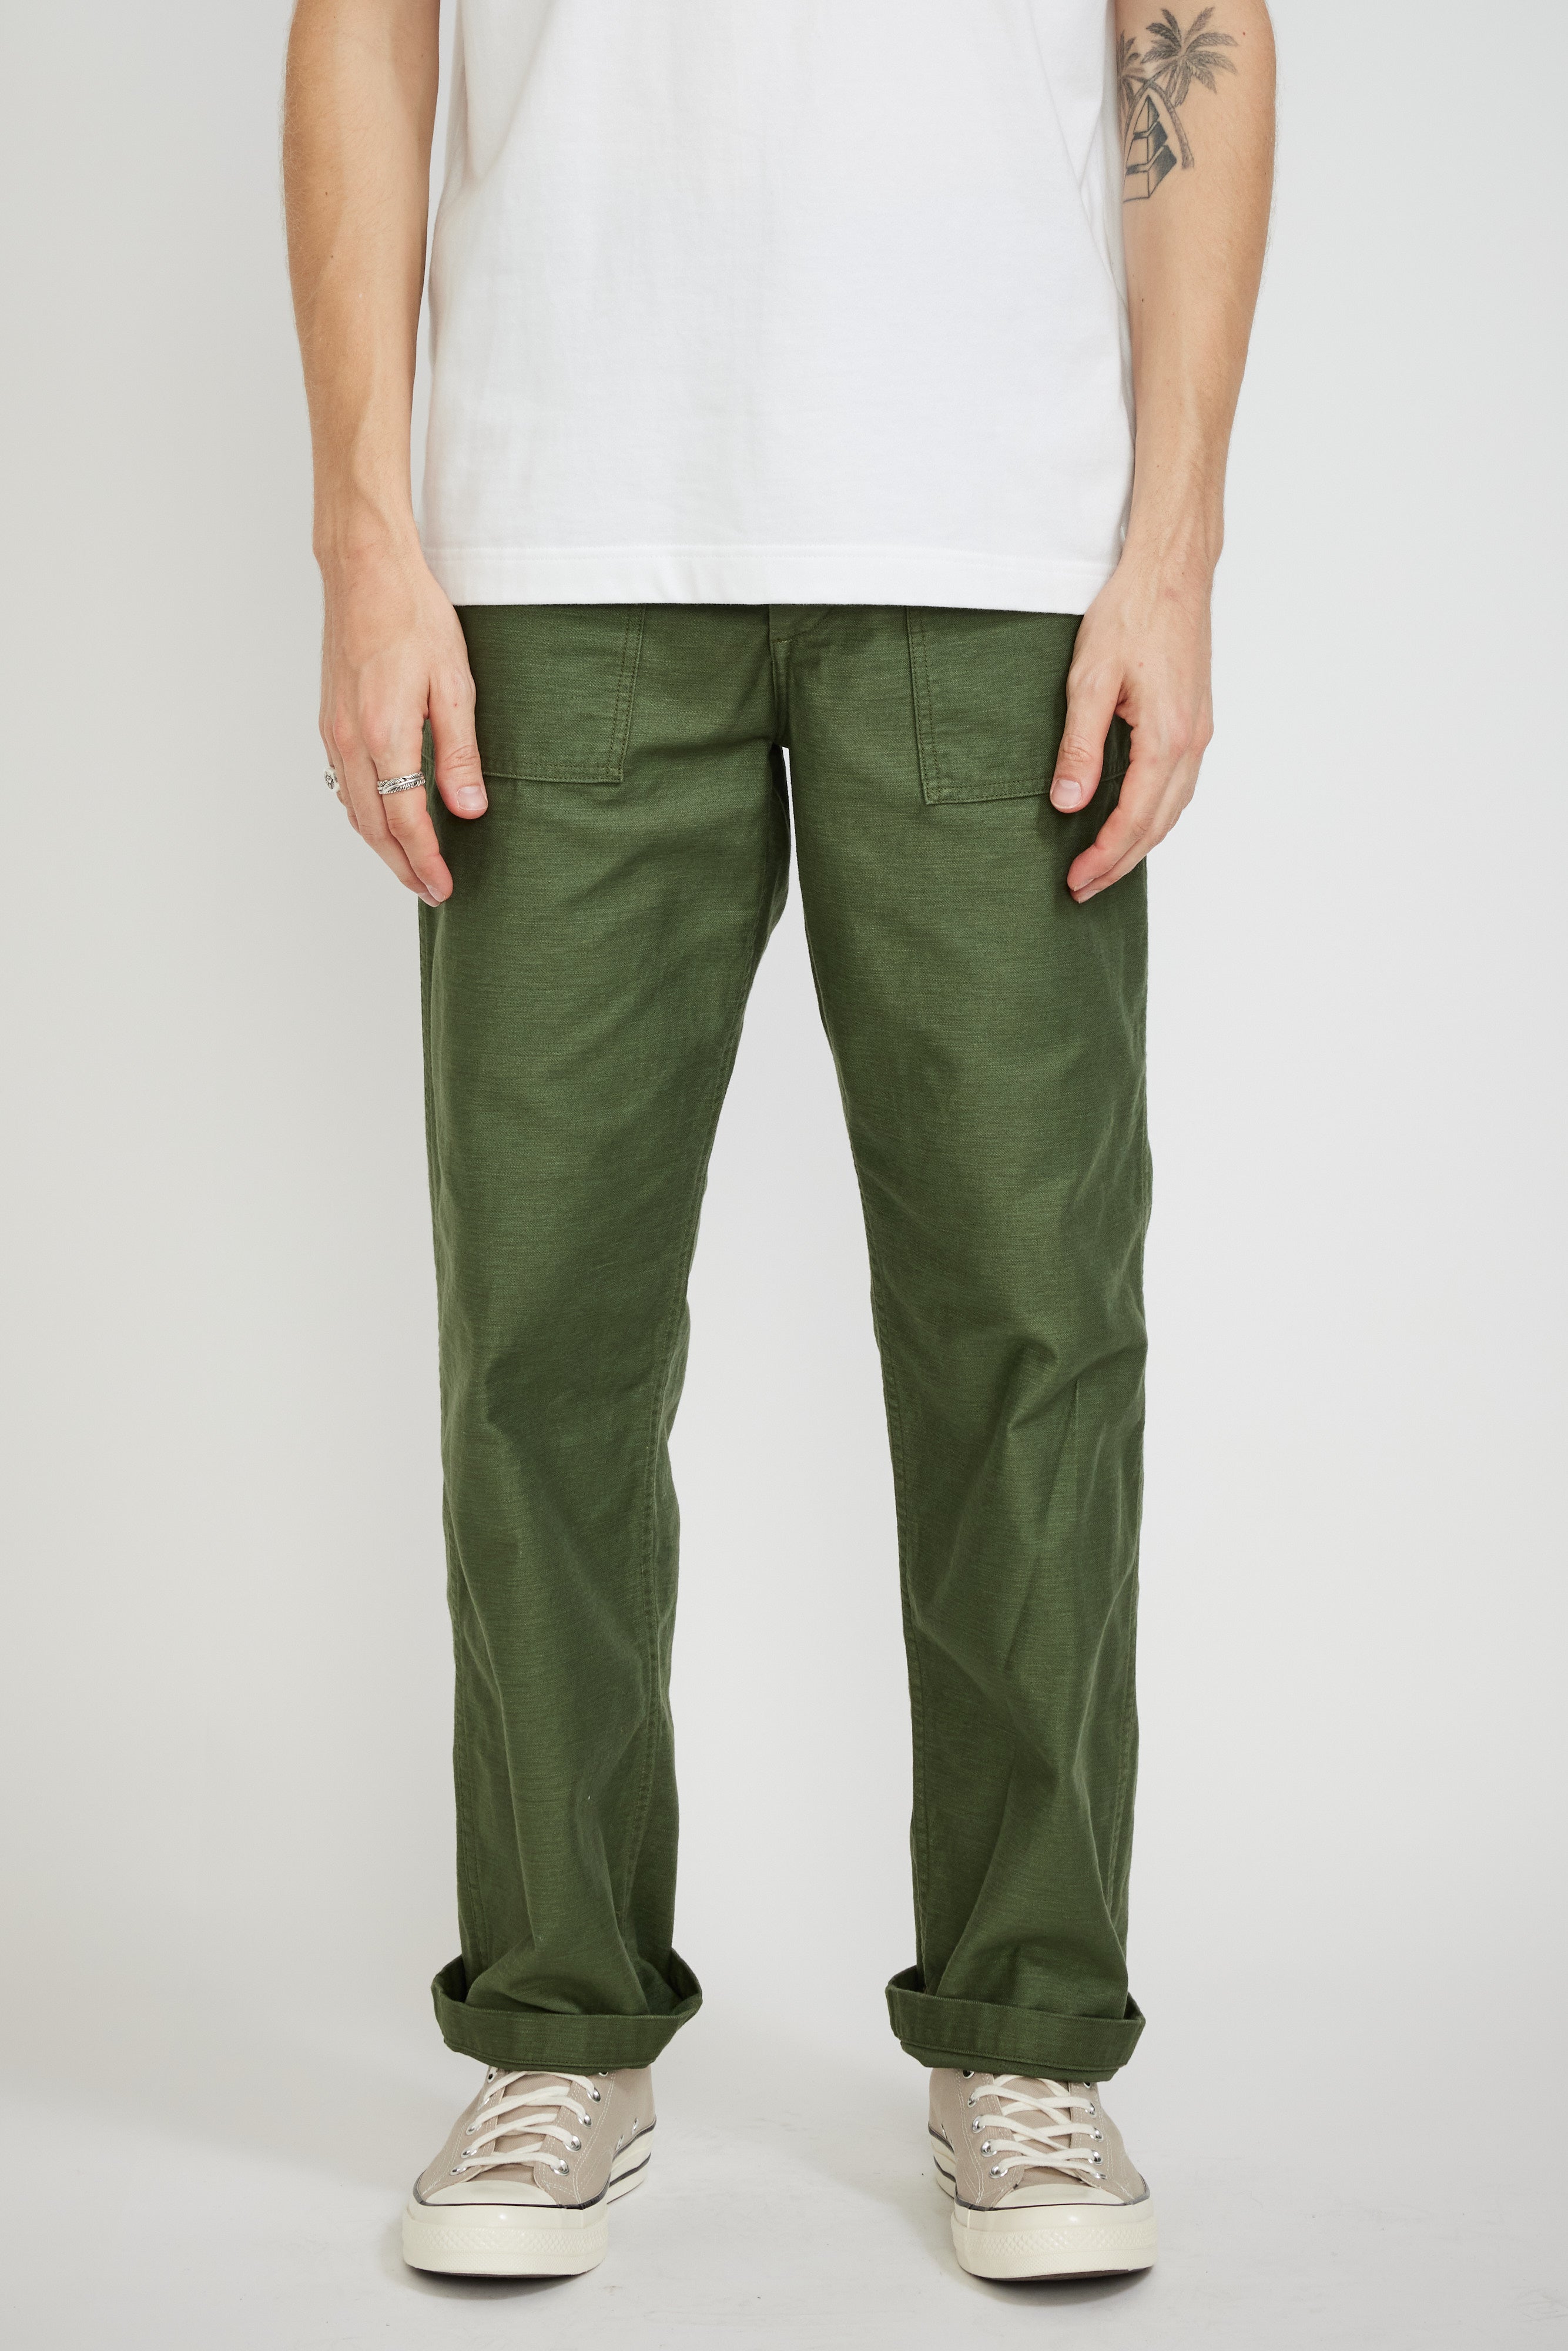 Orslow U.S Army Fatigue Pants Green | Maplestore